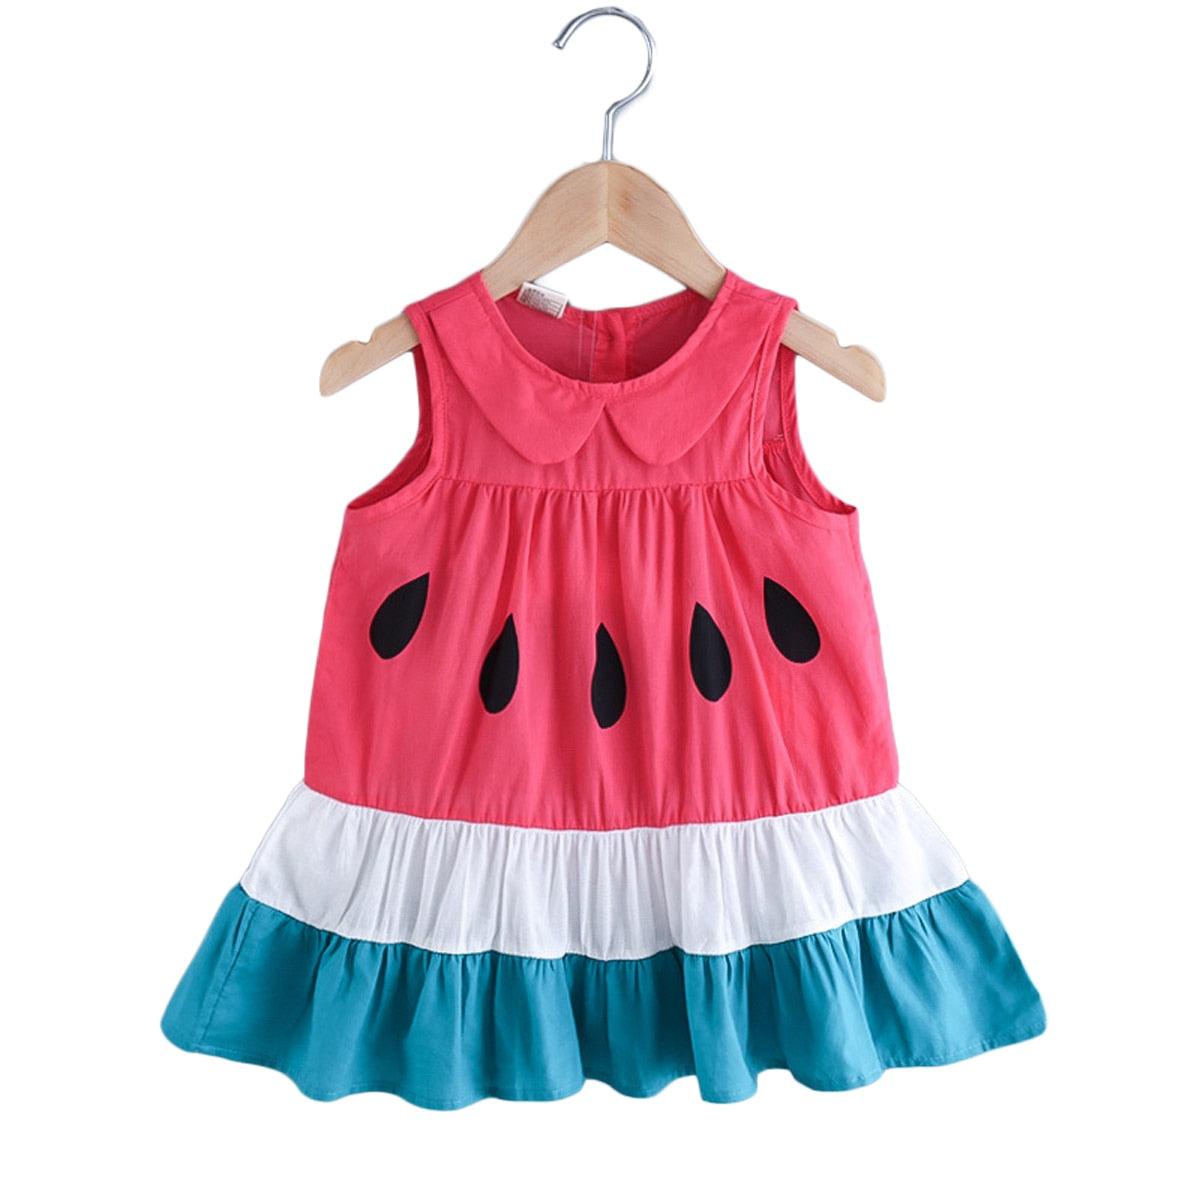 Watermelon Printed Ruffle Dress - Shop Baby Boutiques 